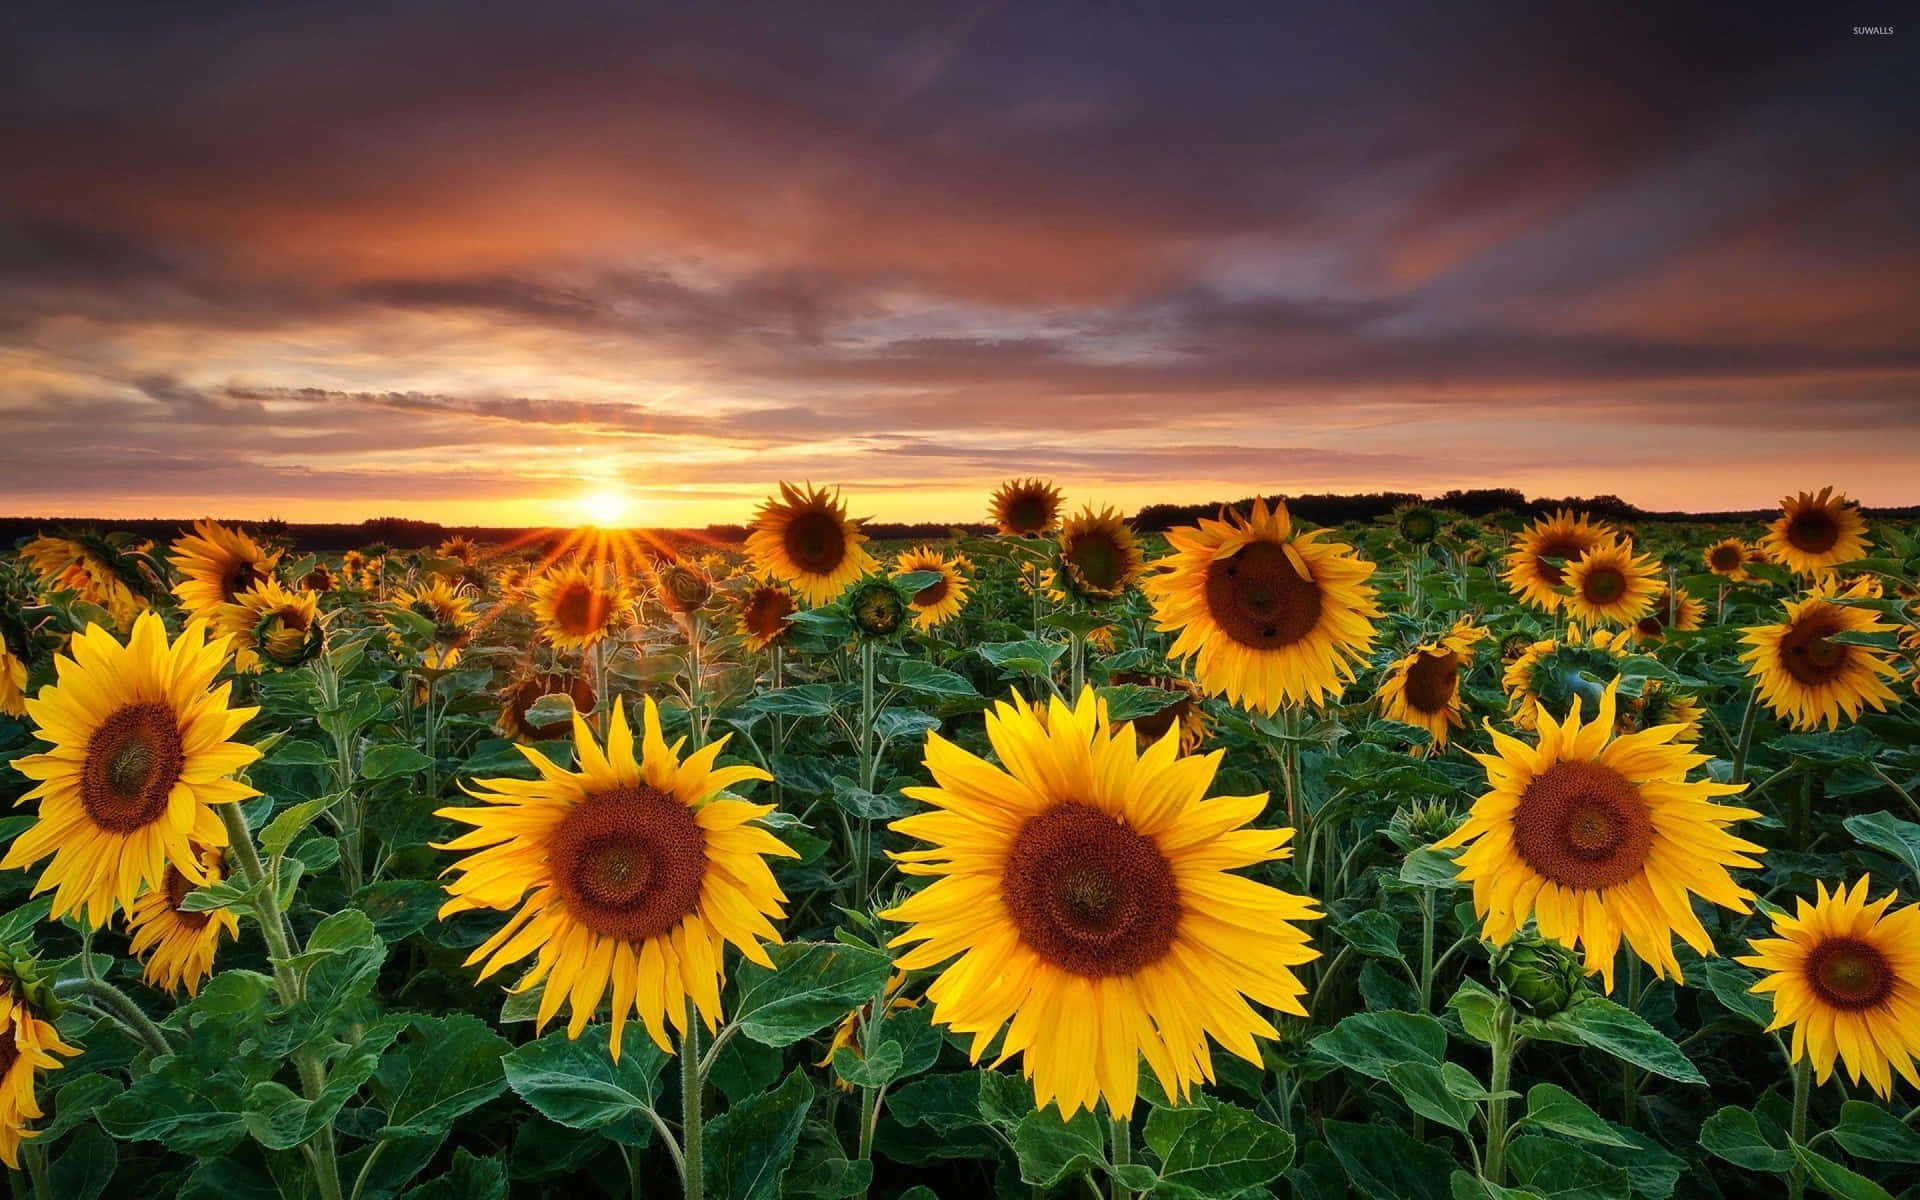 sunflowers in the field at sunset